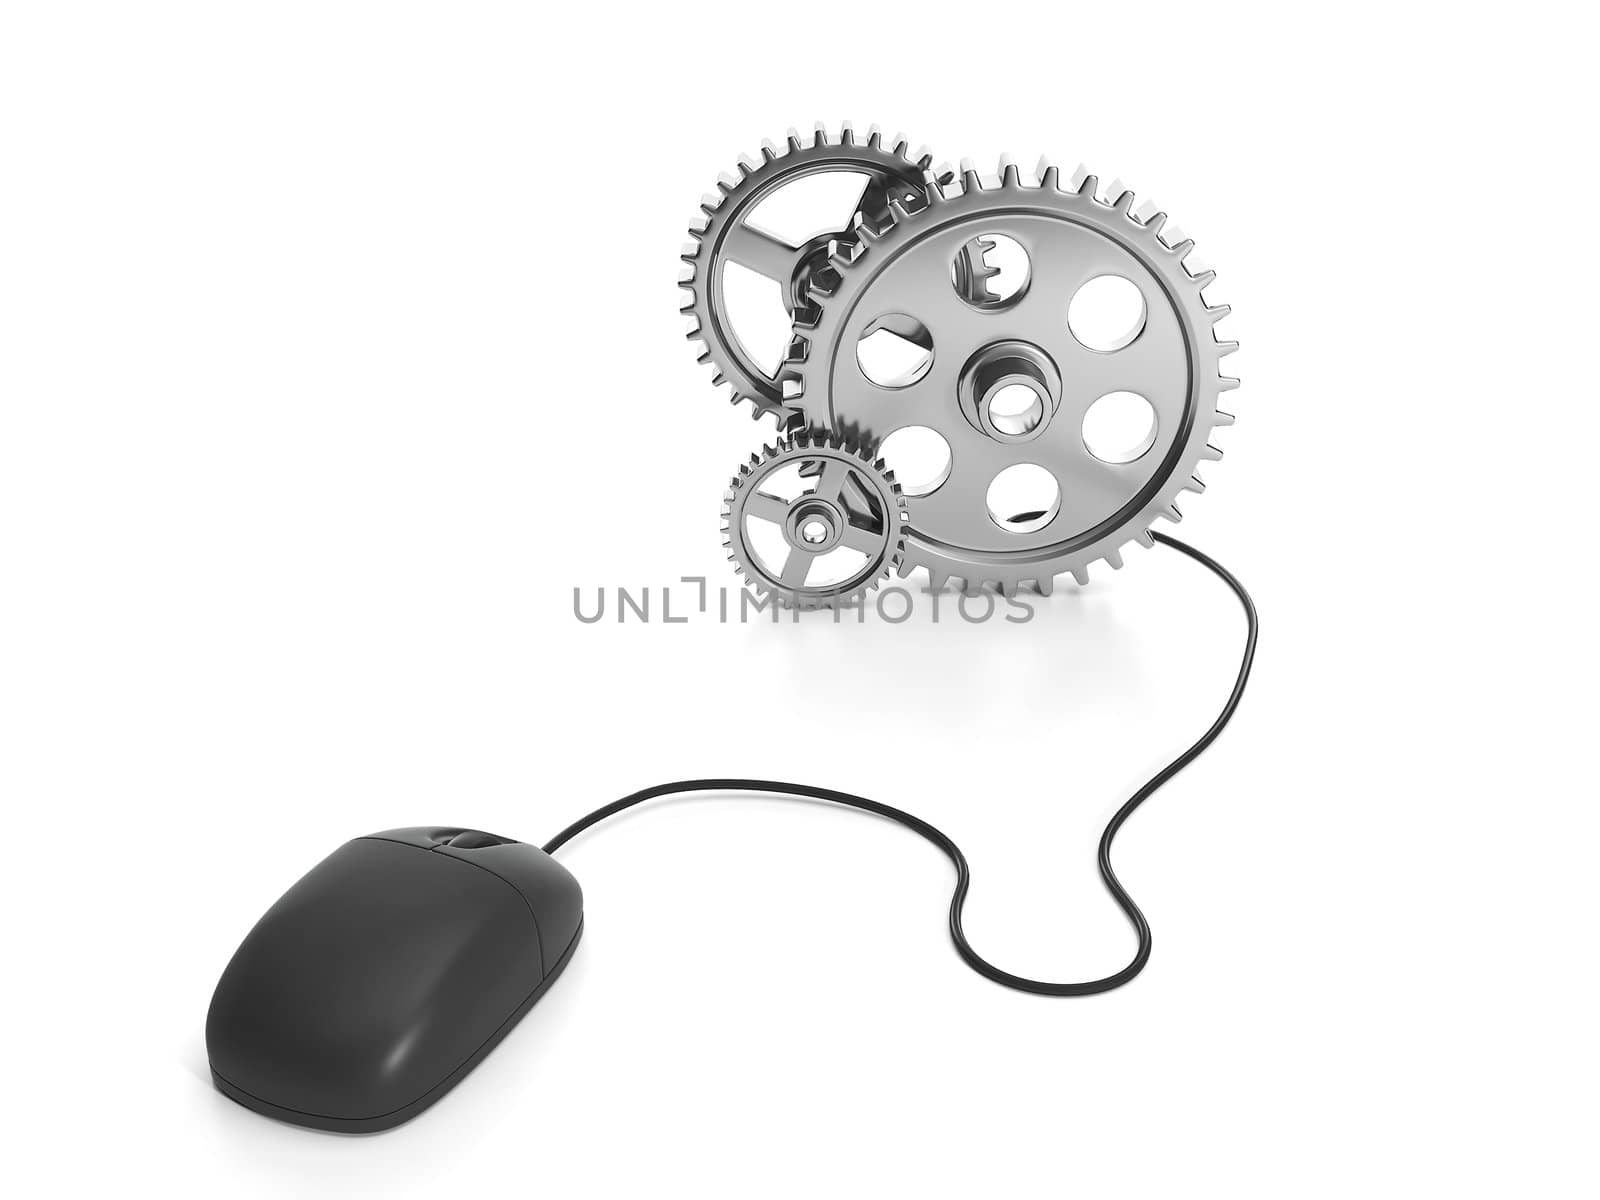 3d illustration of internet technology. Work on the Internet, a computer mouse and gears